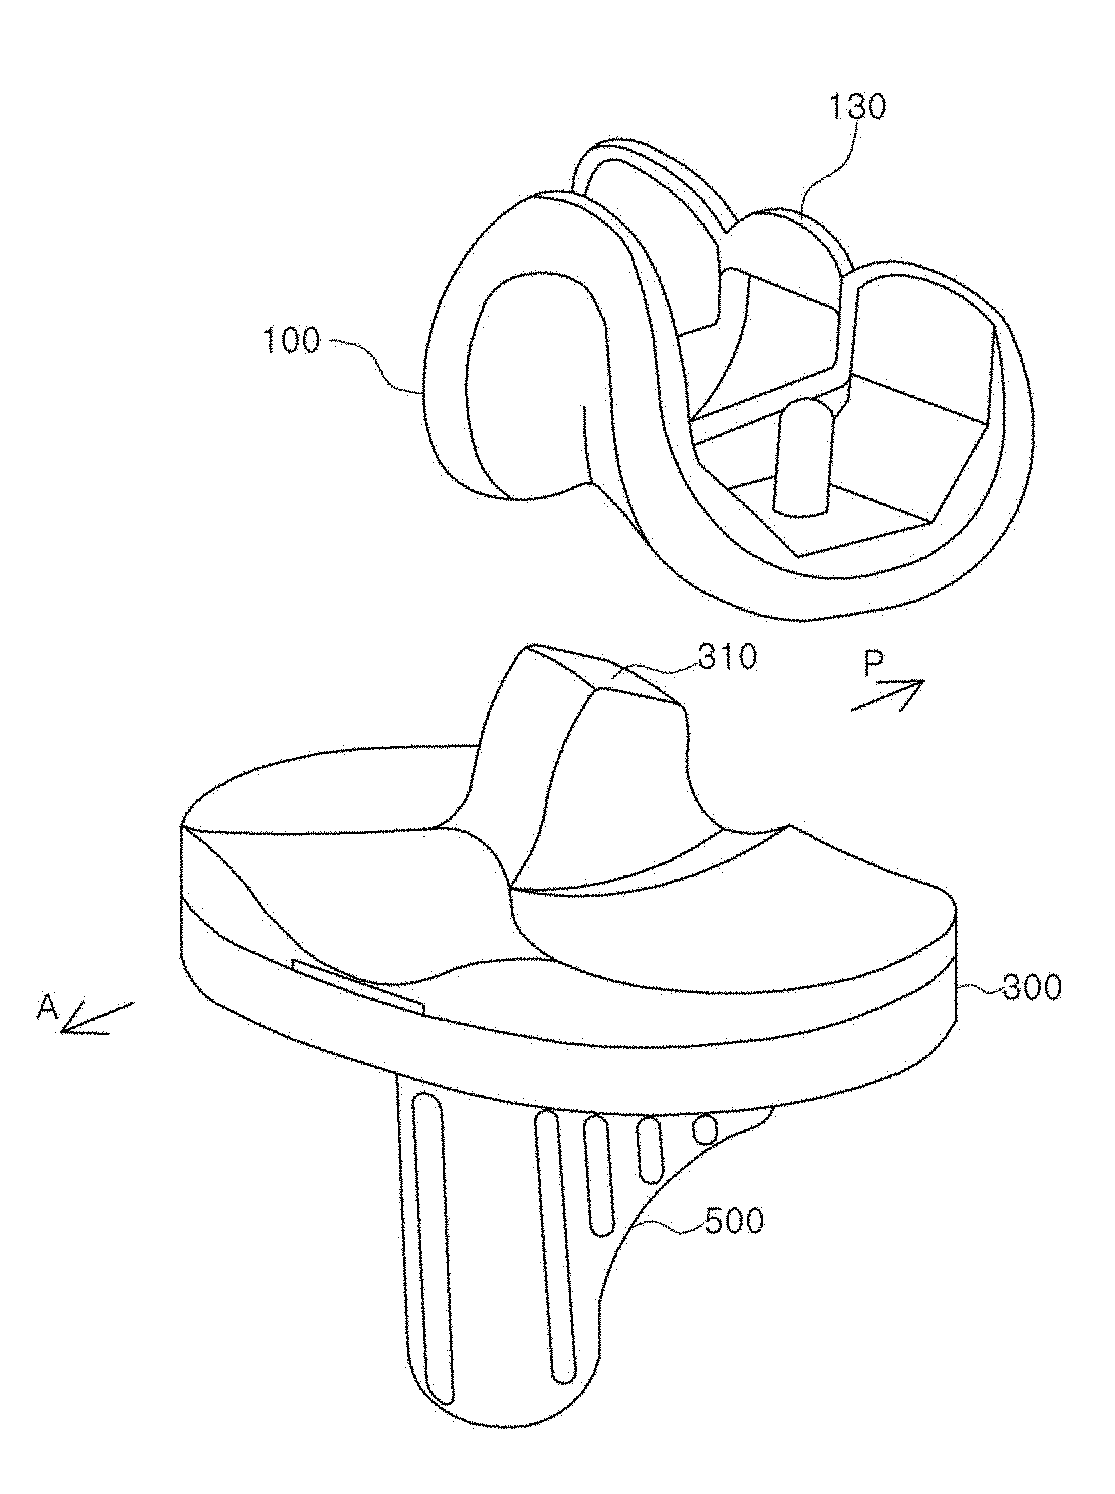 Artificial knee joint capable of preventing dislocation of thighbone coupling member